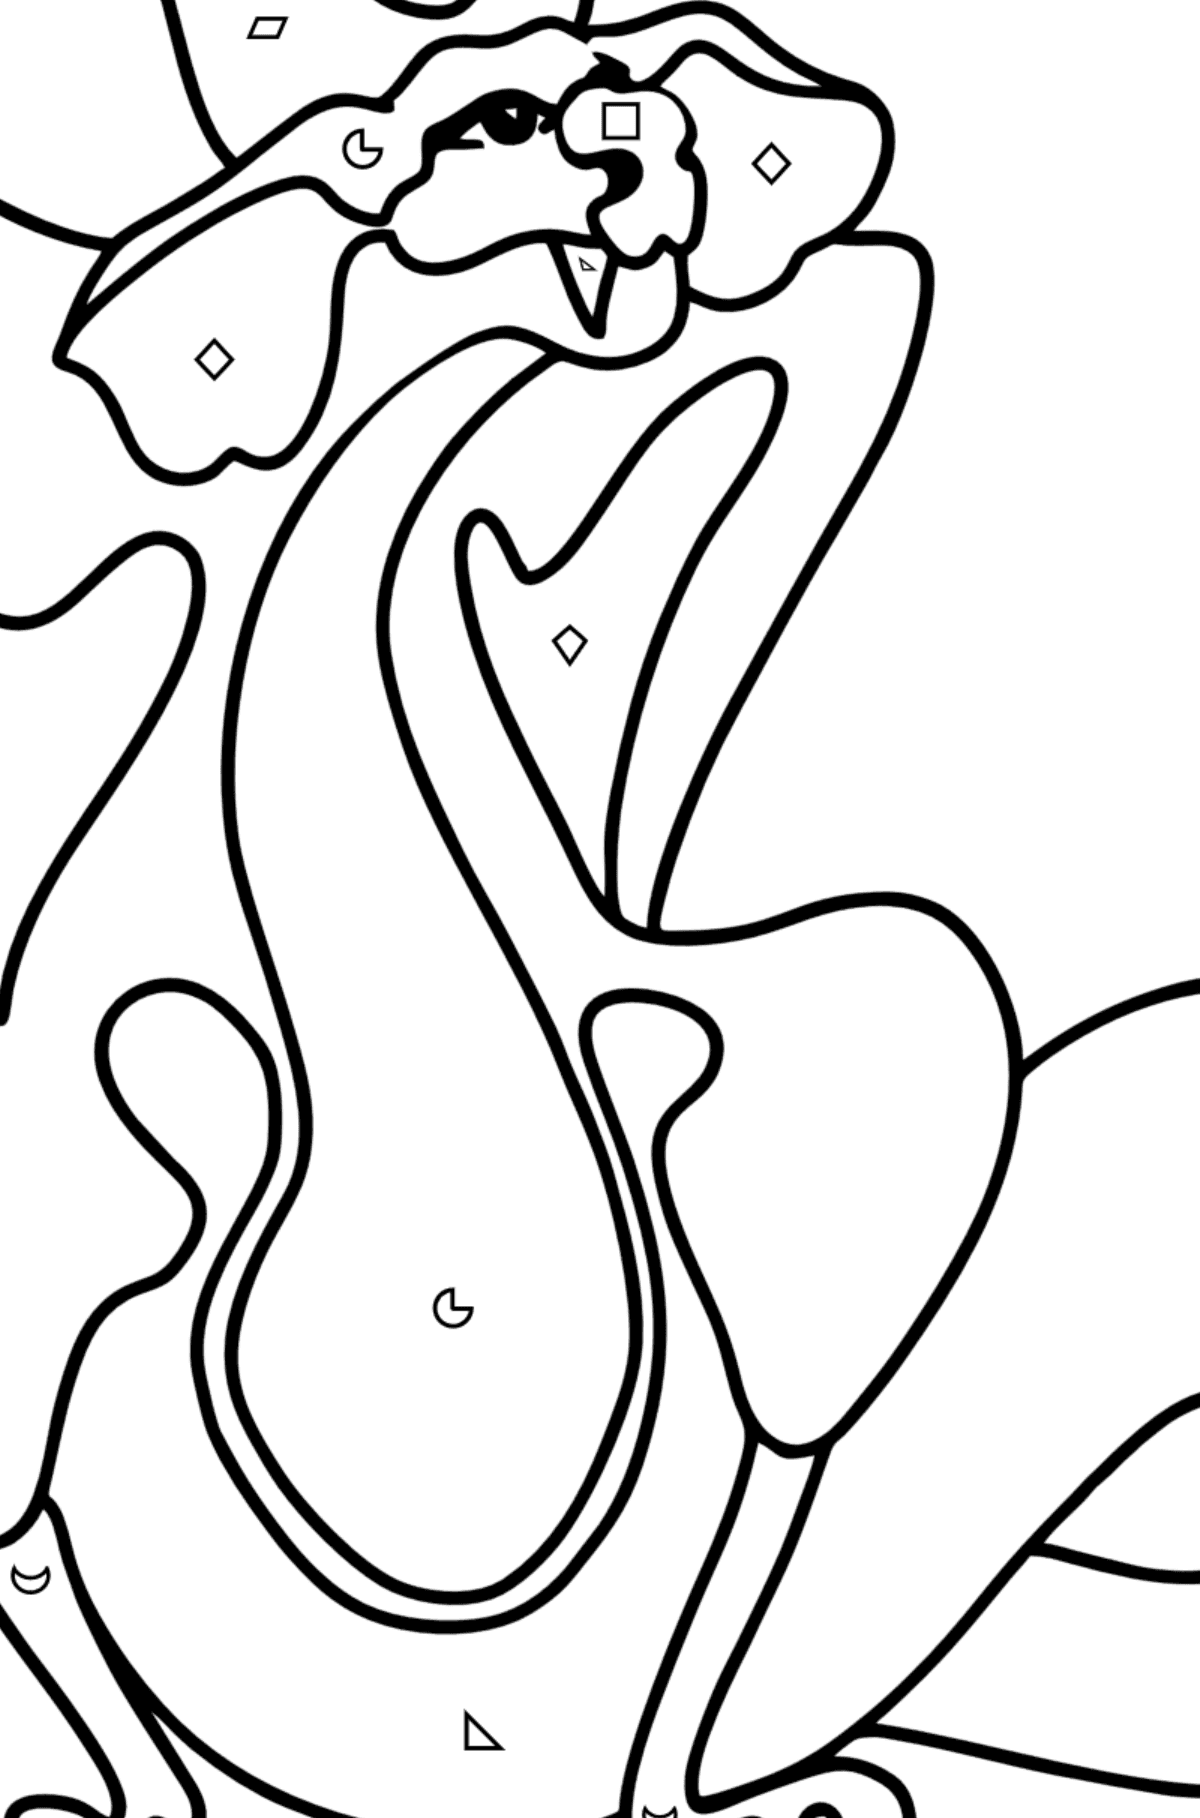 Sad Dragon coloring page - Coloring by Geometric Shapes for Kids